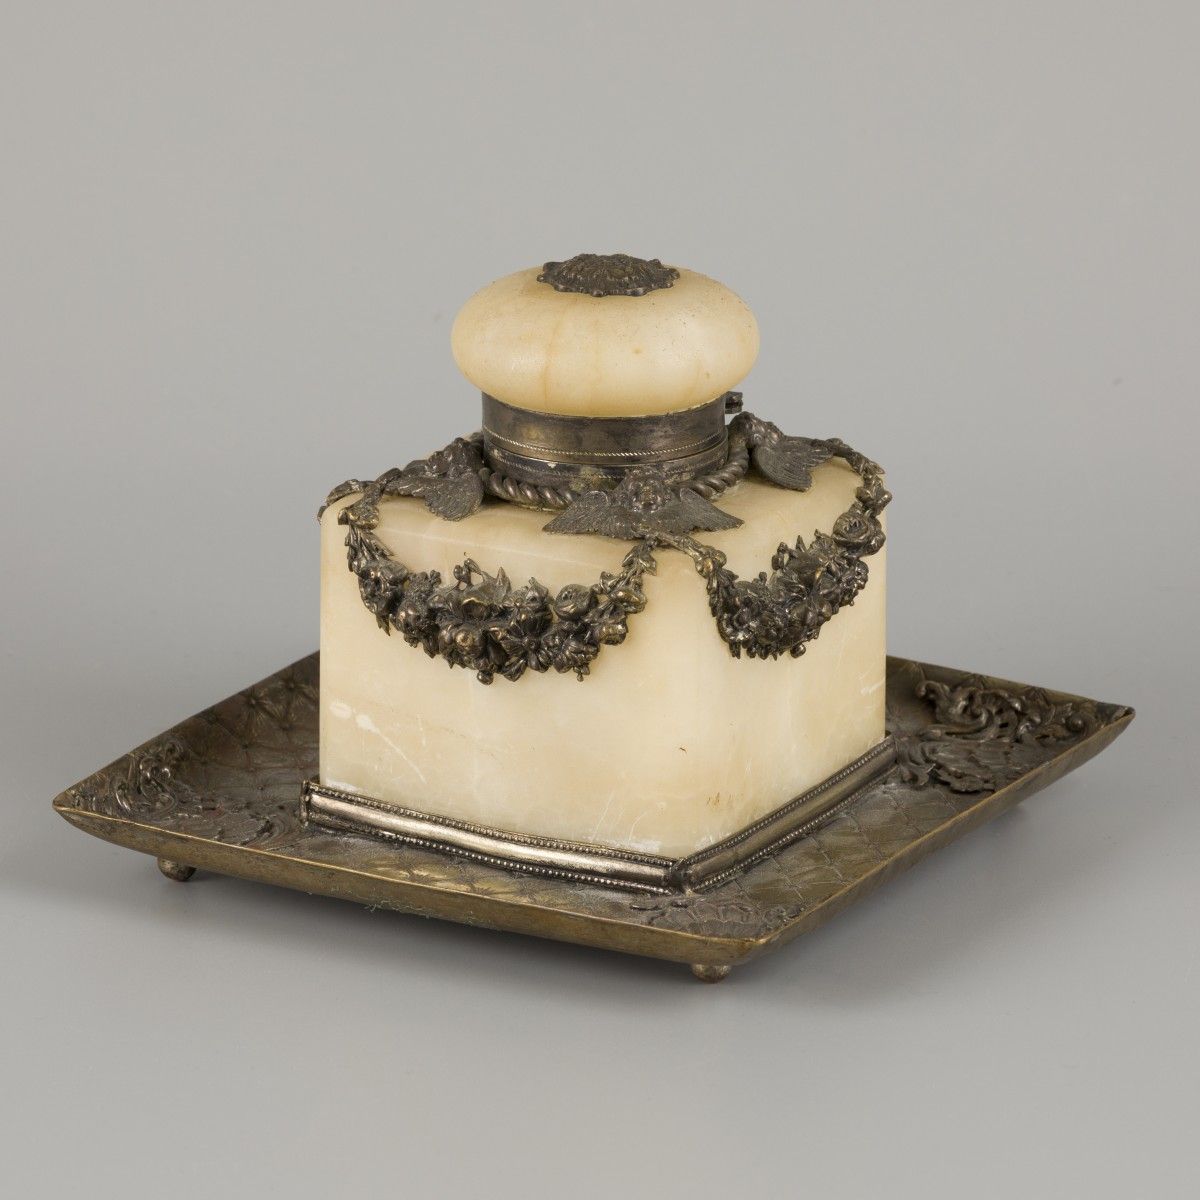 An alabaster inkwell with glass insert, France, late 19th century. Couronné d'un&hellip;